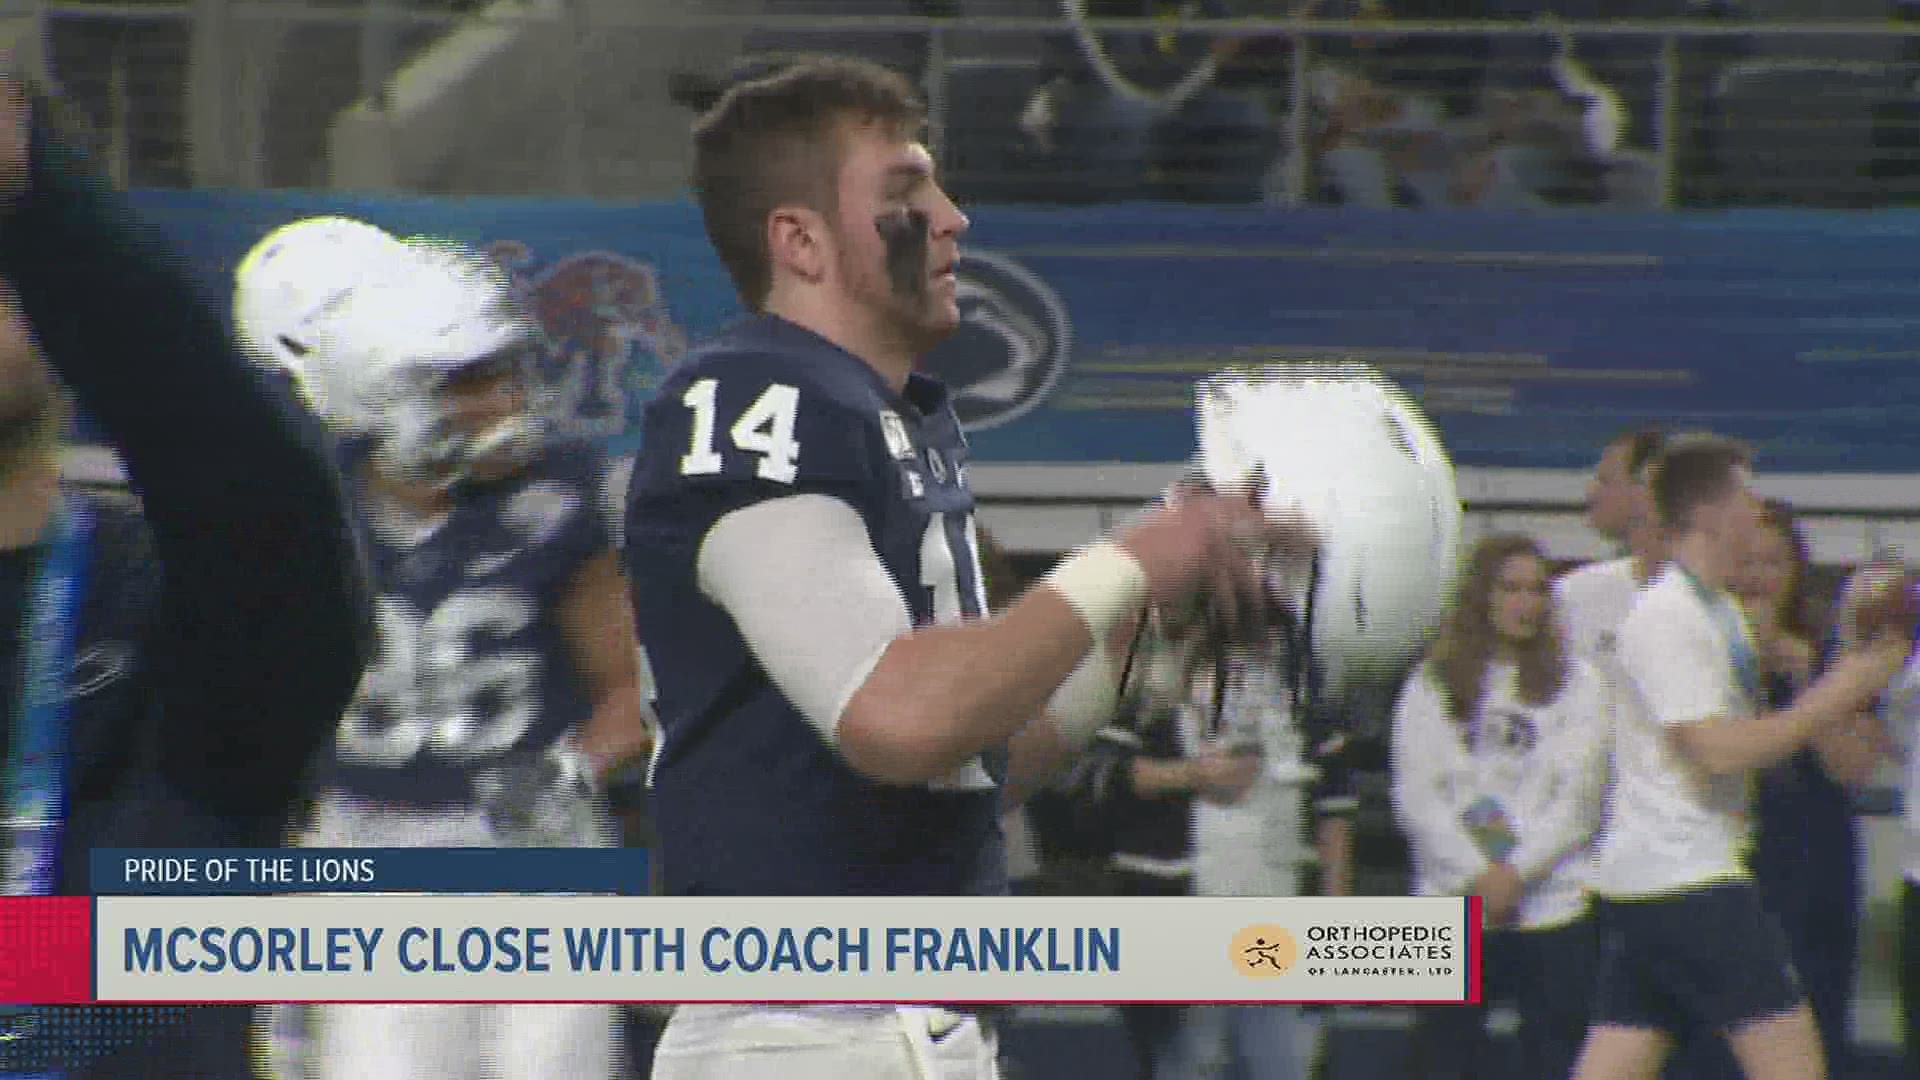 The Sunday Sports Frenzy catches up with former PSU quarterback Trace McSorley to break down the Nittany Lions and Sean Clifford.